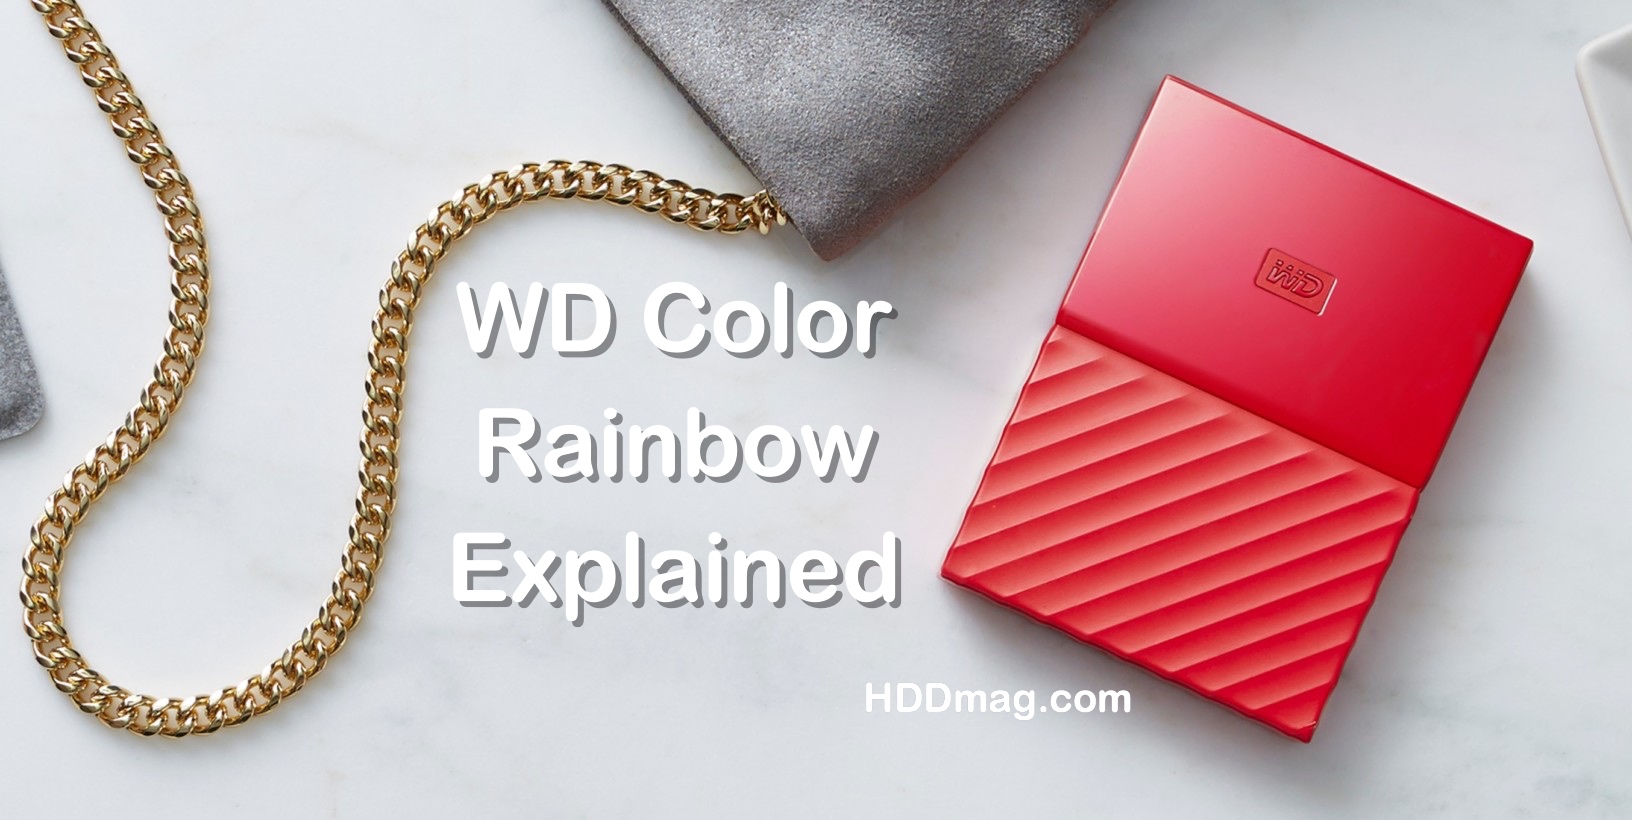 wd colors explained